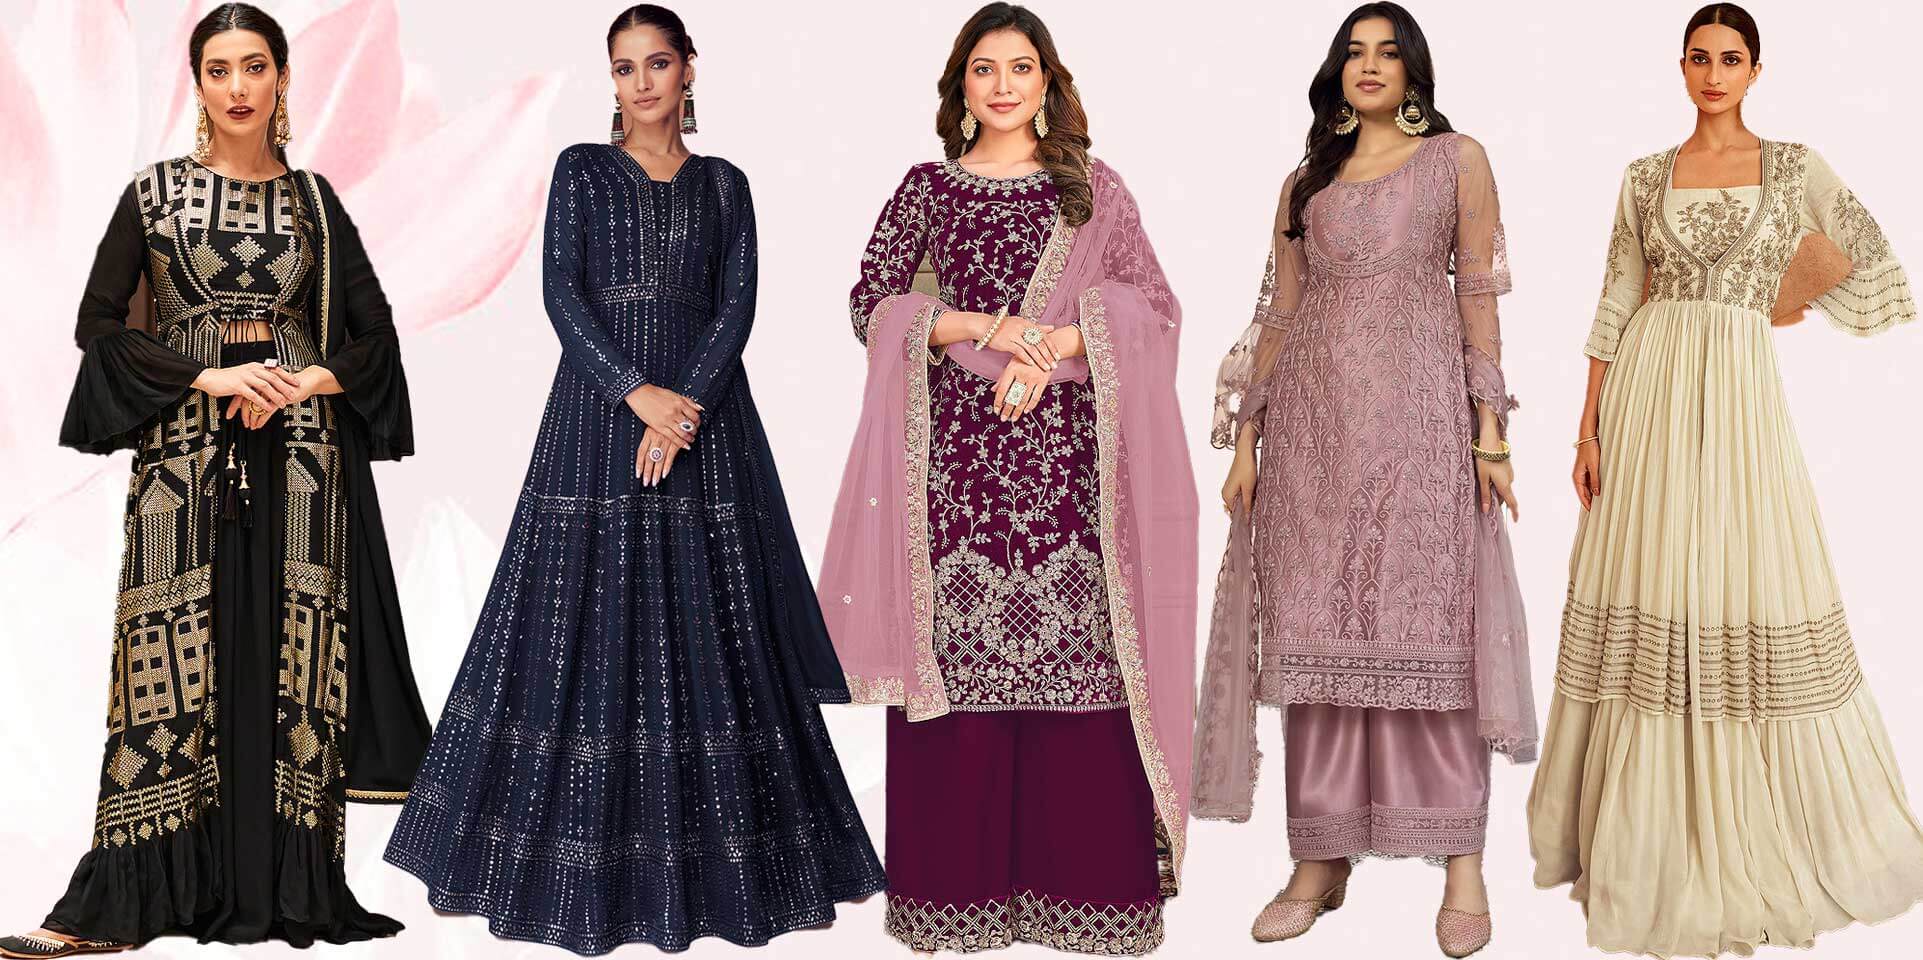 What are the Trending EID Outfit Ideas for 2022 for Women?